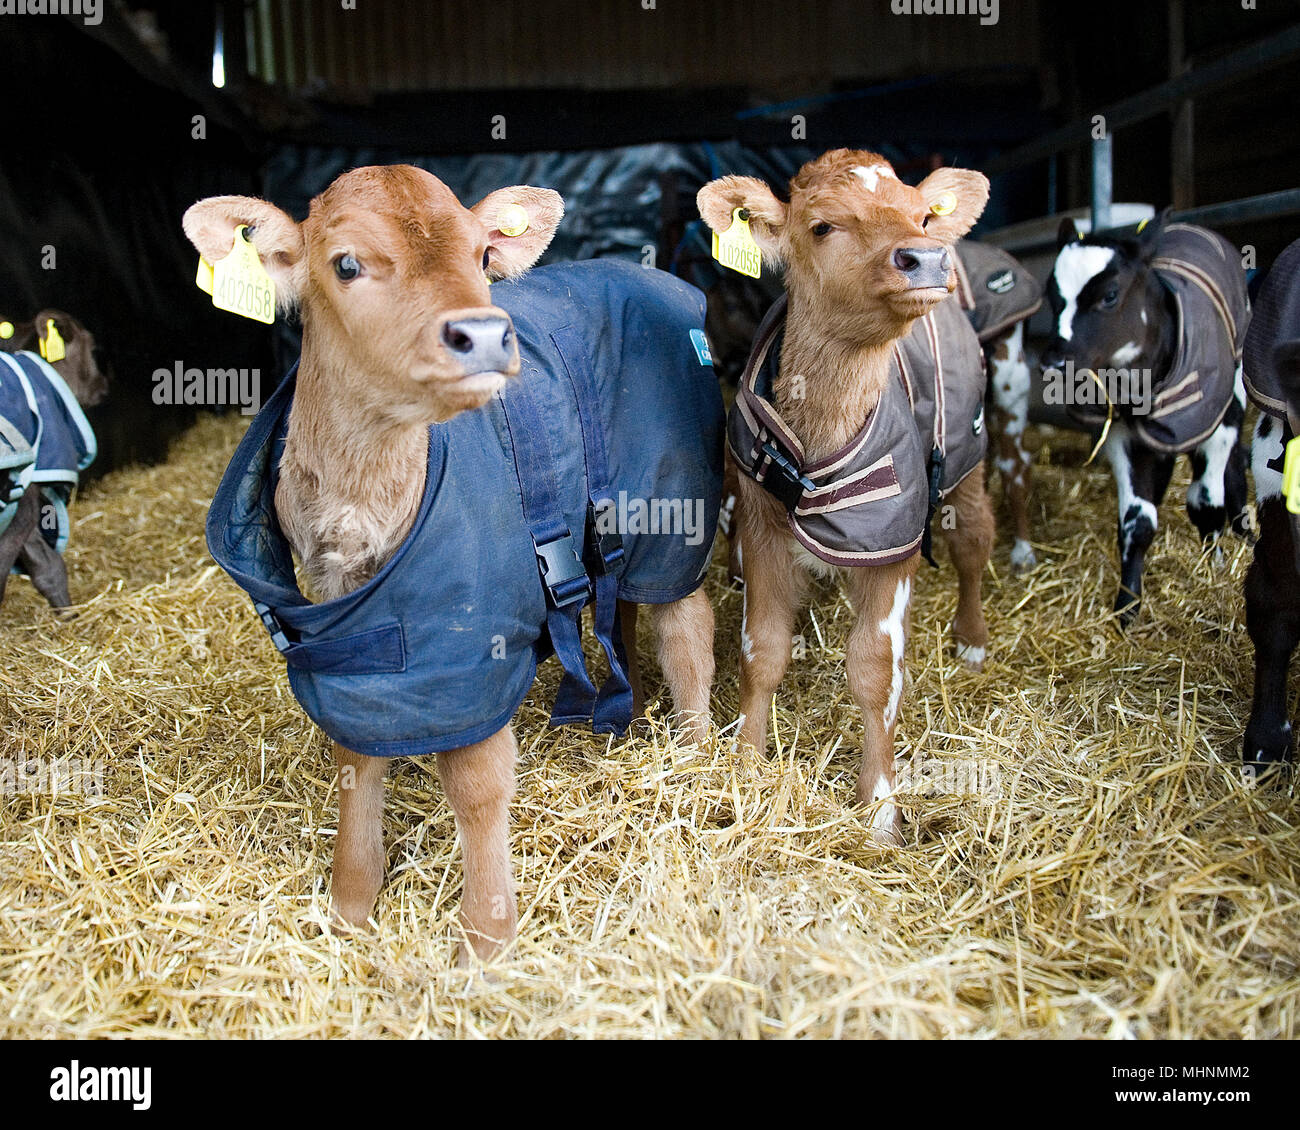 3 day old heifer calves wearing coats in winter Stock Photo